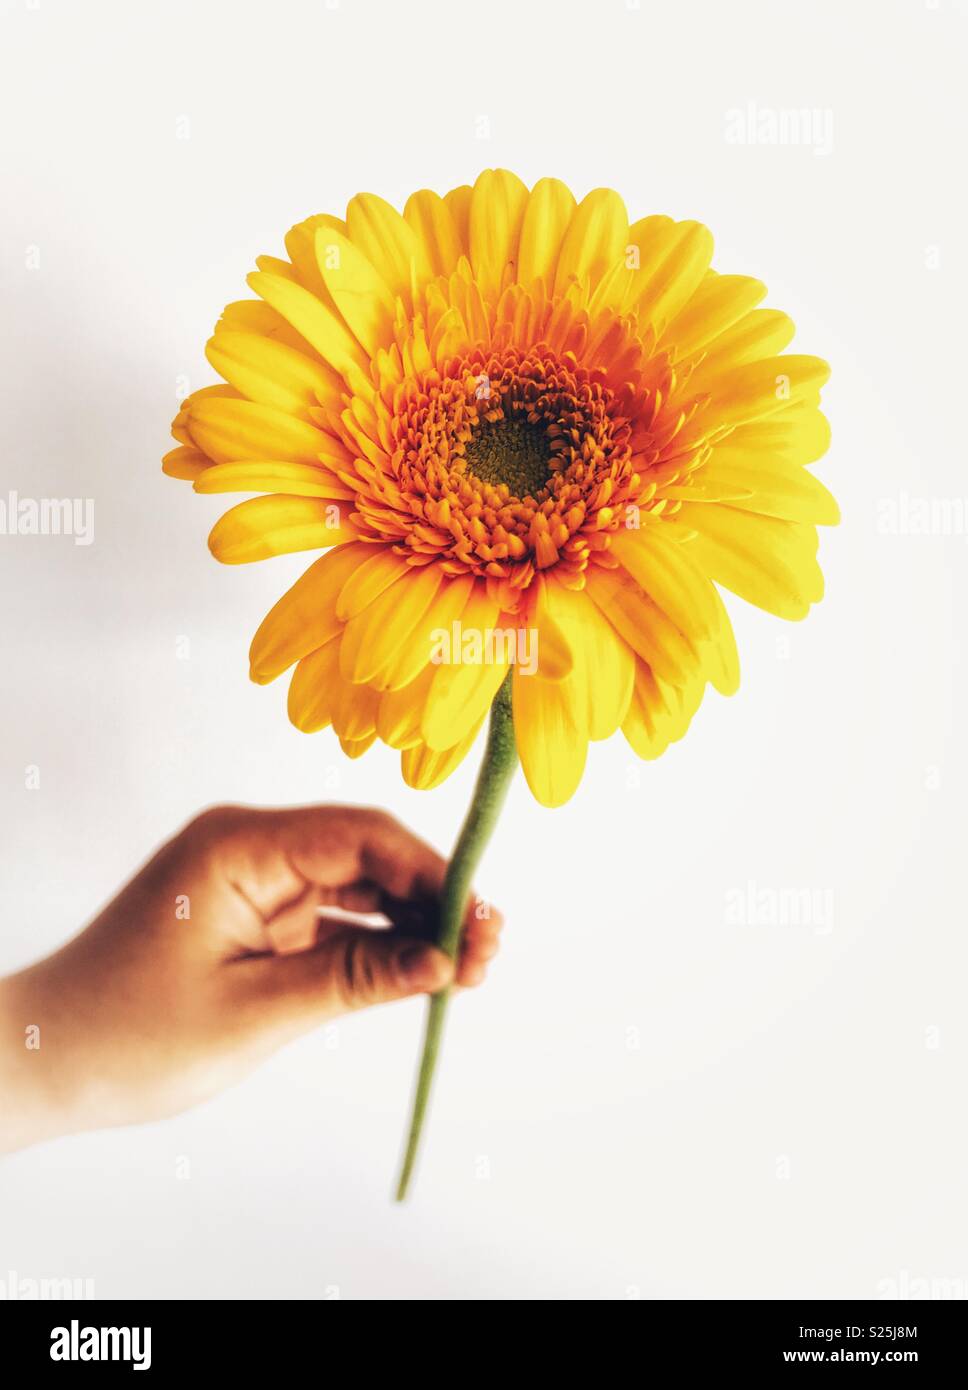 Woman holding s yellow gerbera daisy against a plain background Stock Photo